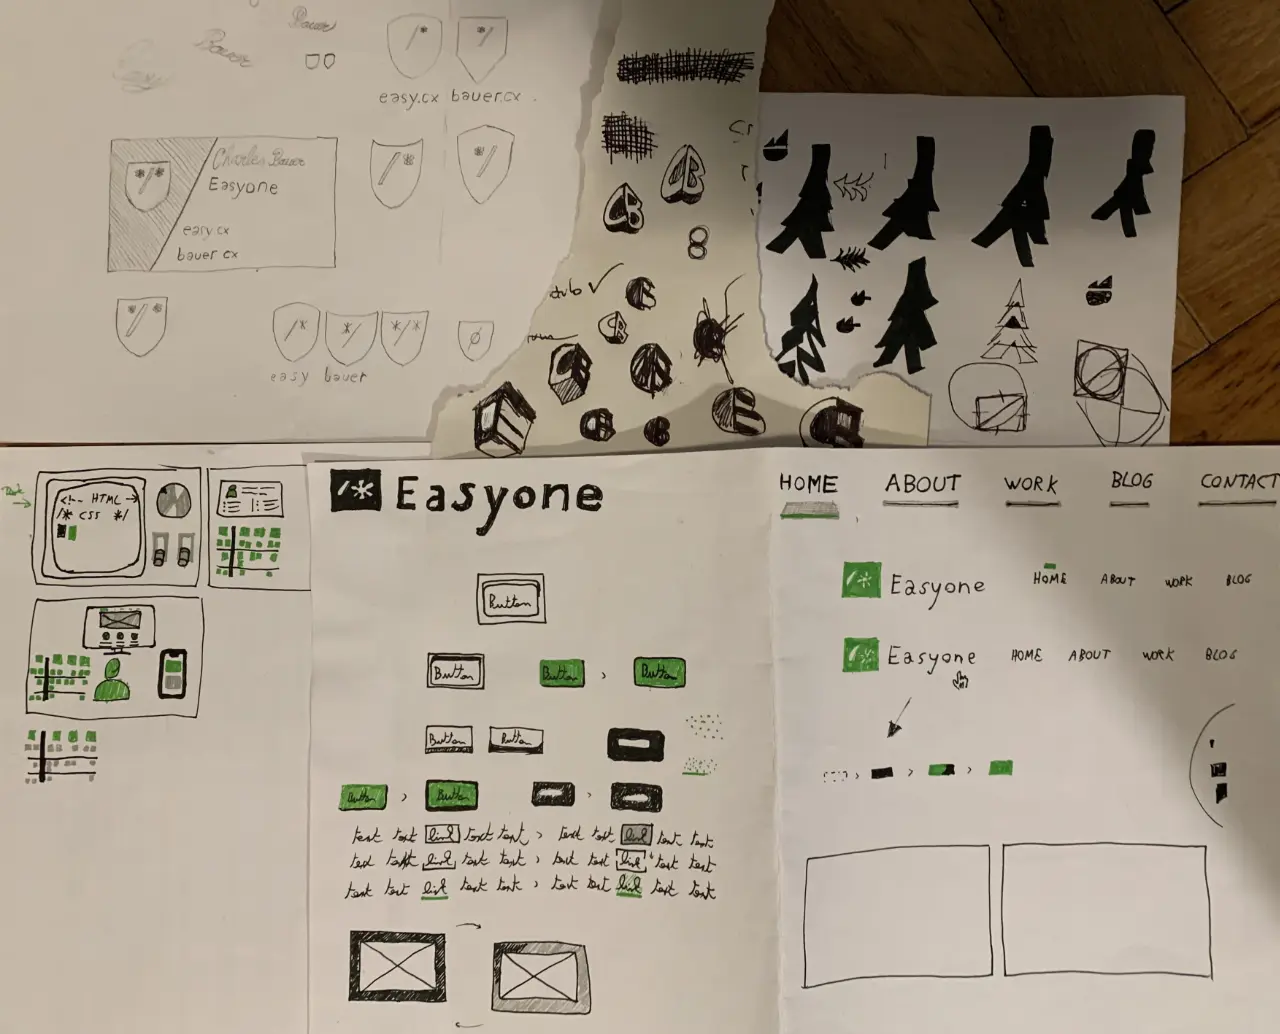 Scan of paper sketches with logos and UI elements.